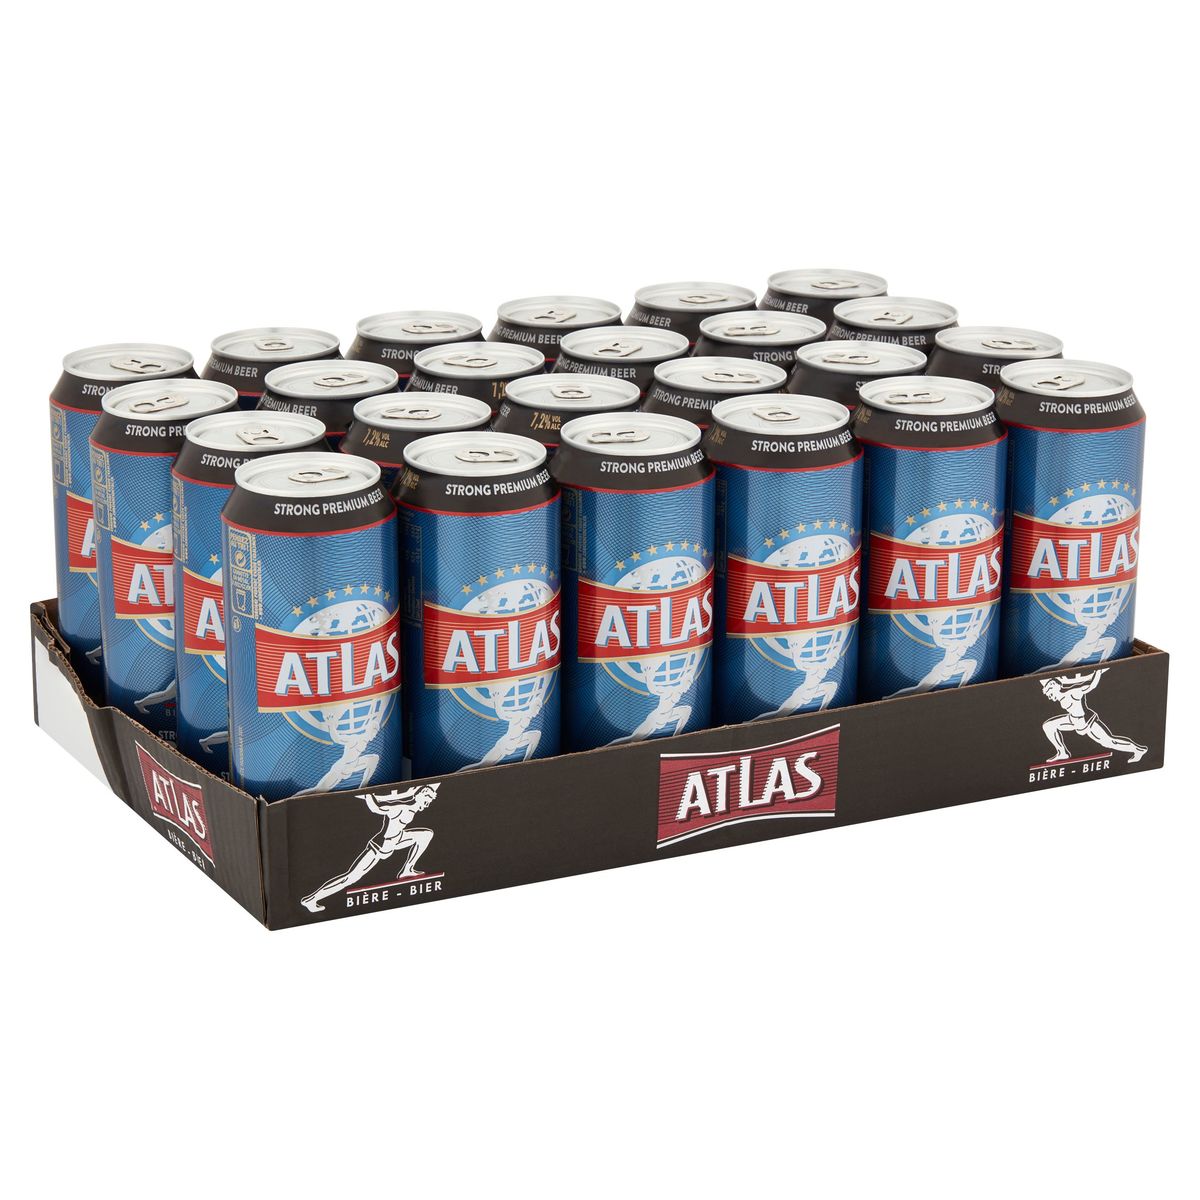 Atlas Strong Premium Beer 7.2% Canettes 24x50 cl